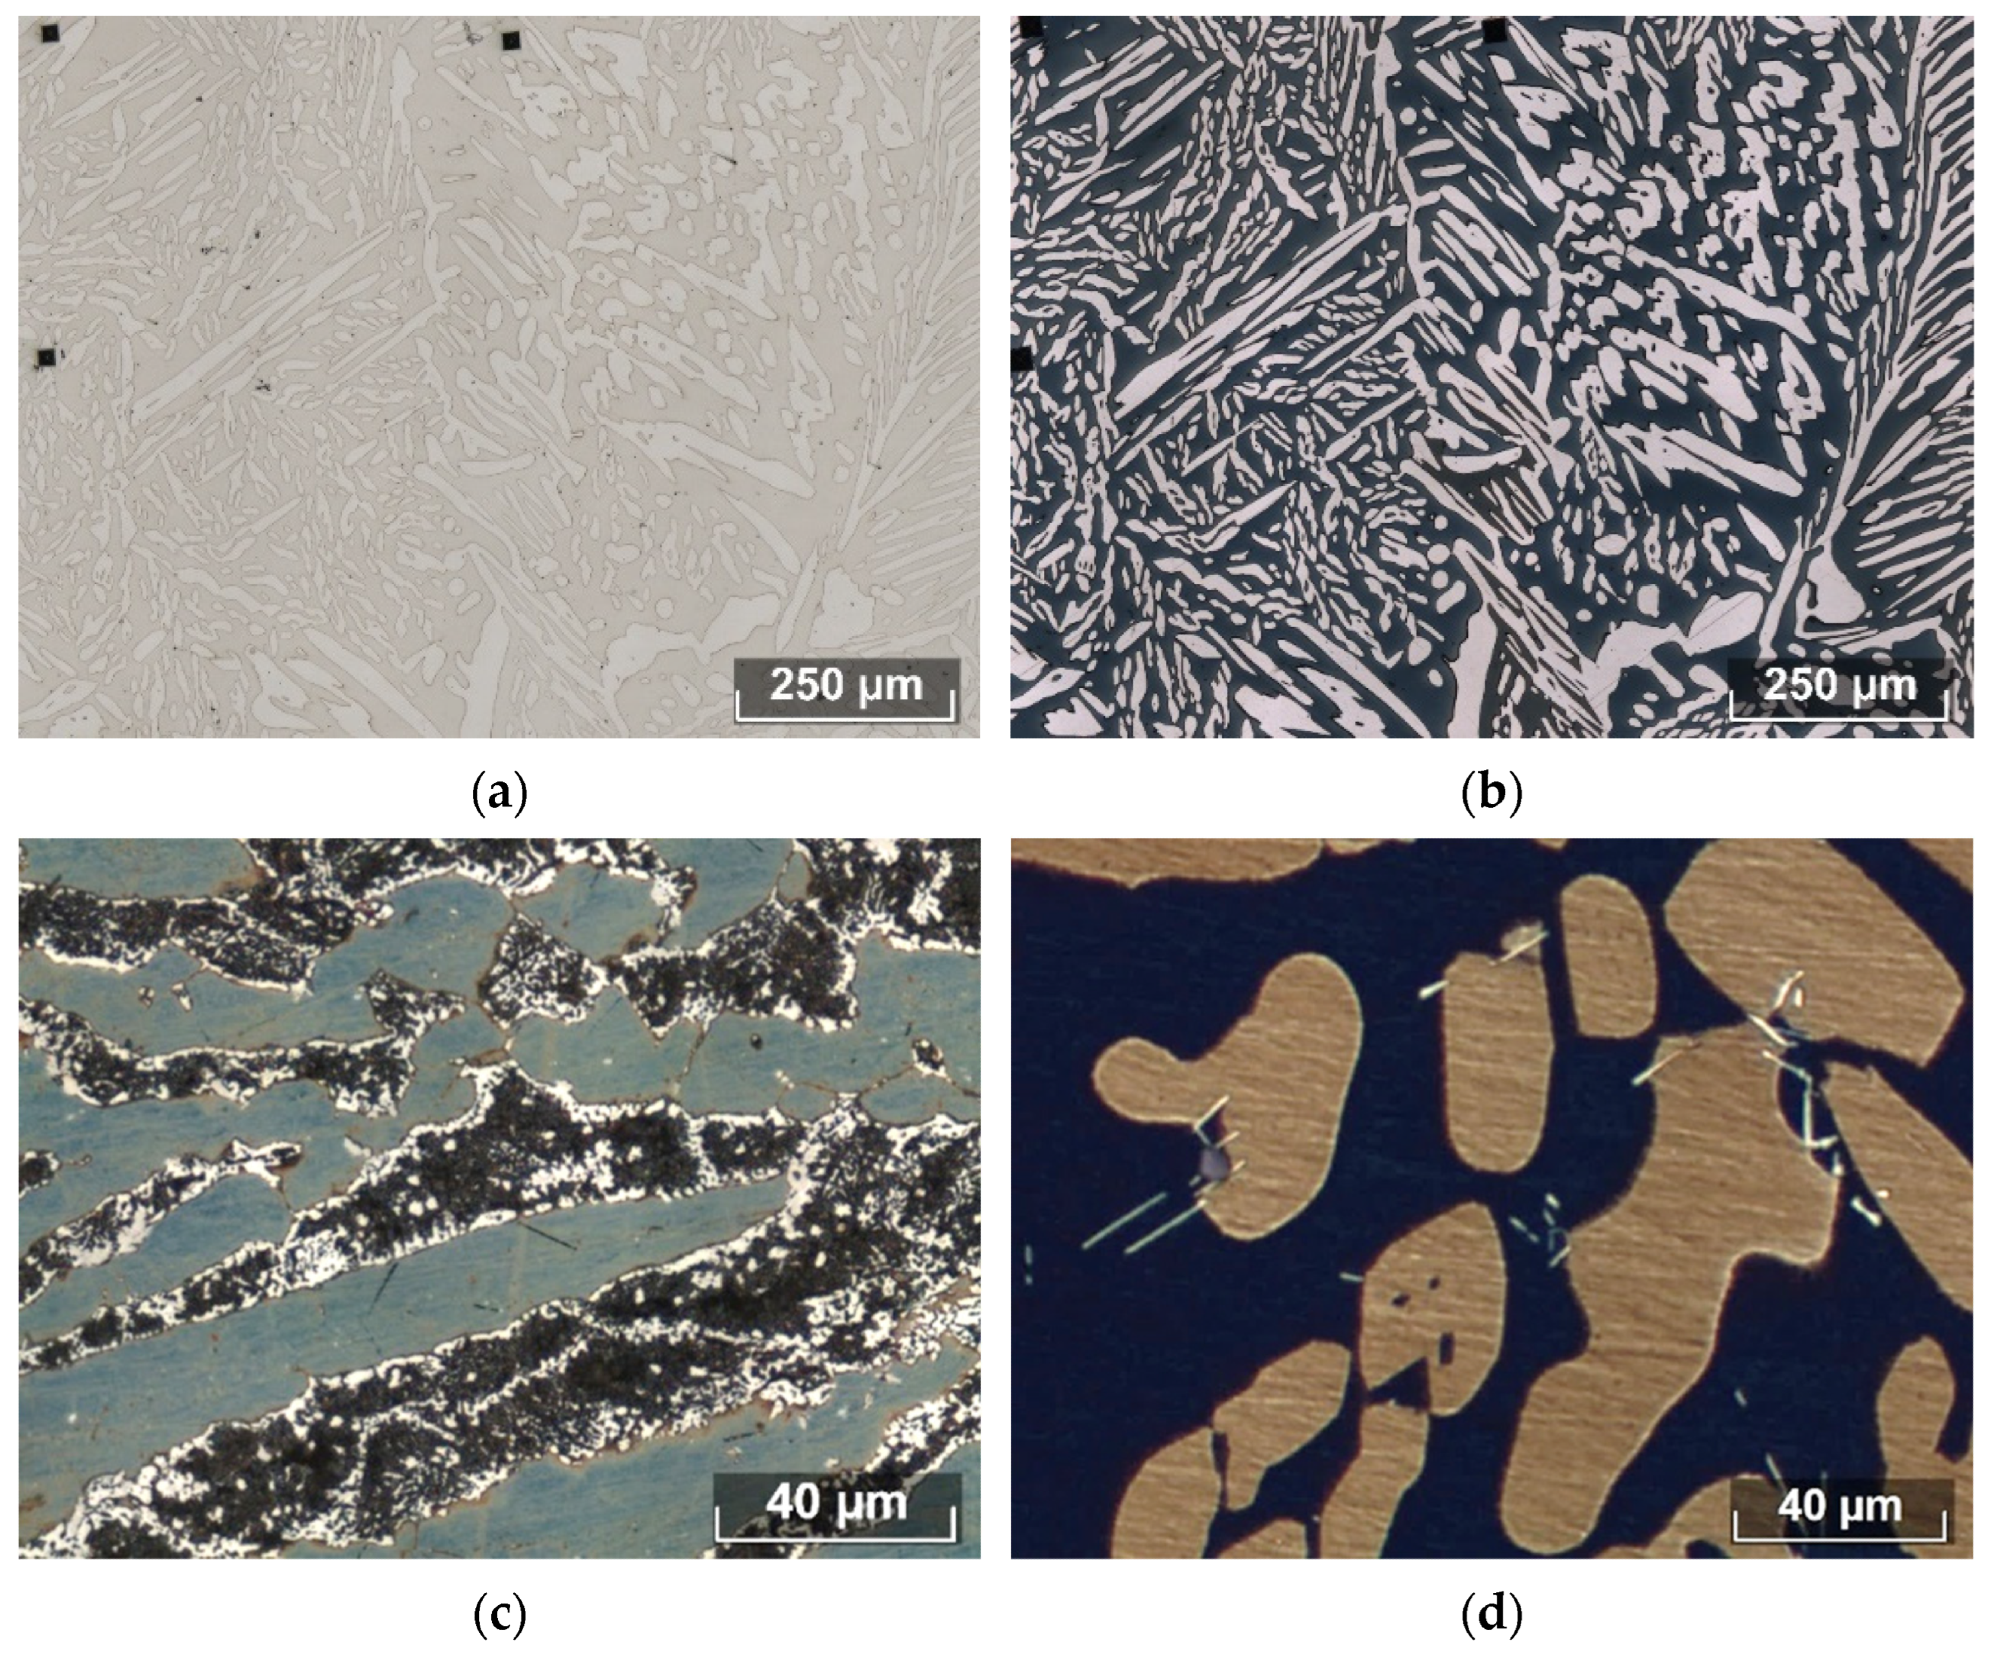 Microstructure of studied steels after electrolytic etching using NaOH (a) and chemical etching using Beraha etchant (b) in Steel 3. The Beraha etchant allows identification of the s phase in Steel 7 (c) and Laves phases in Steel 8 (d).